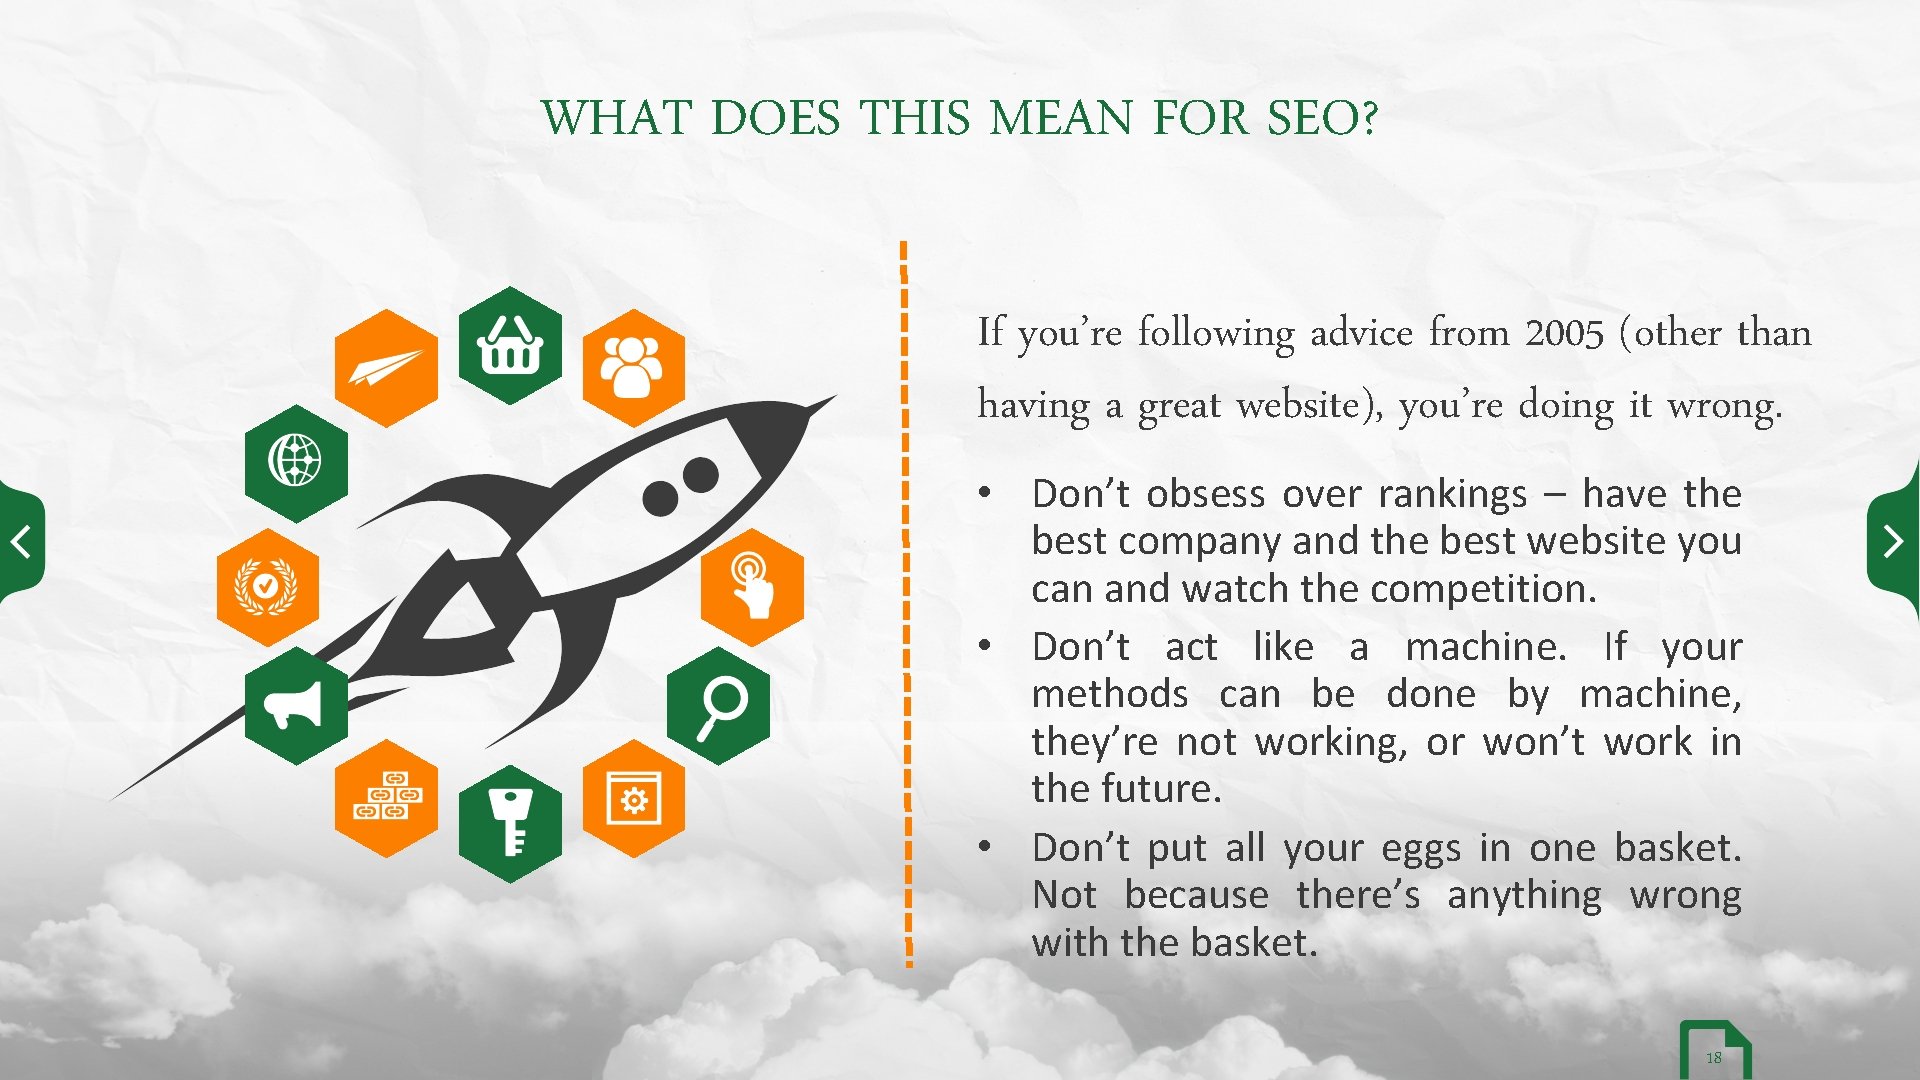 WHAT DOES THIS MEAN FOR SEO? If you’re following advice from 2005 (other than